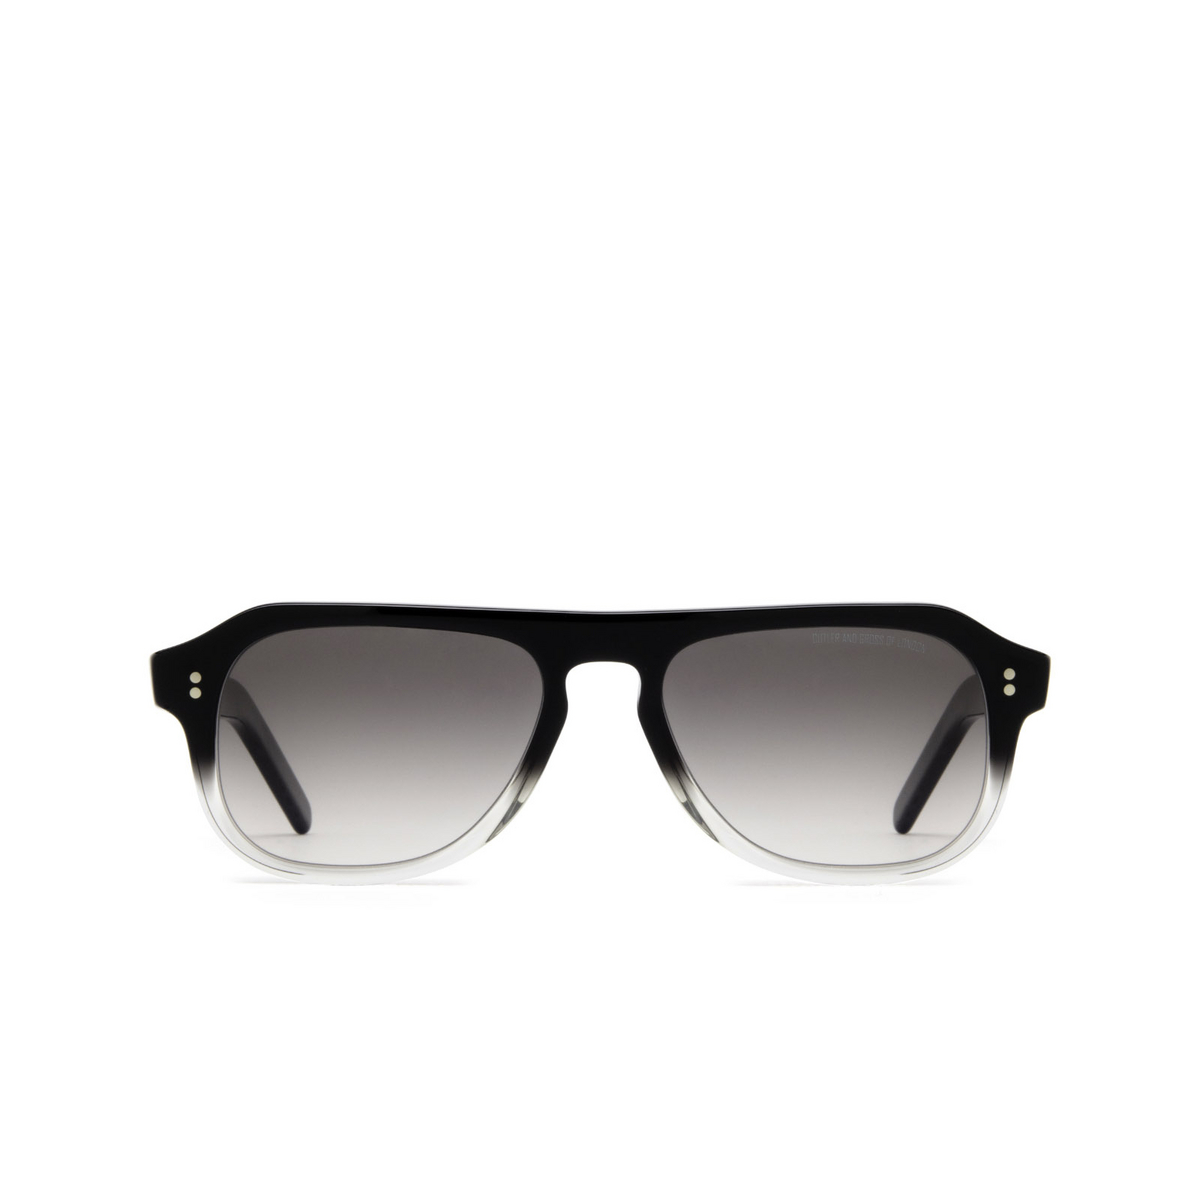 Cutler and Gross® Aviator Sunglasses: 0822V2 SUN color Black To Clear Fade Bcf - front view.